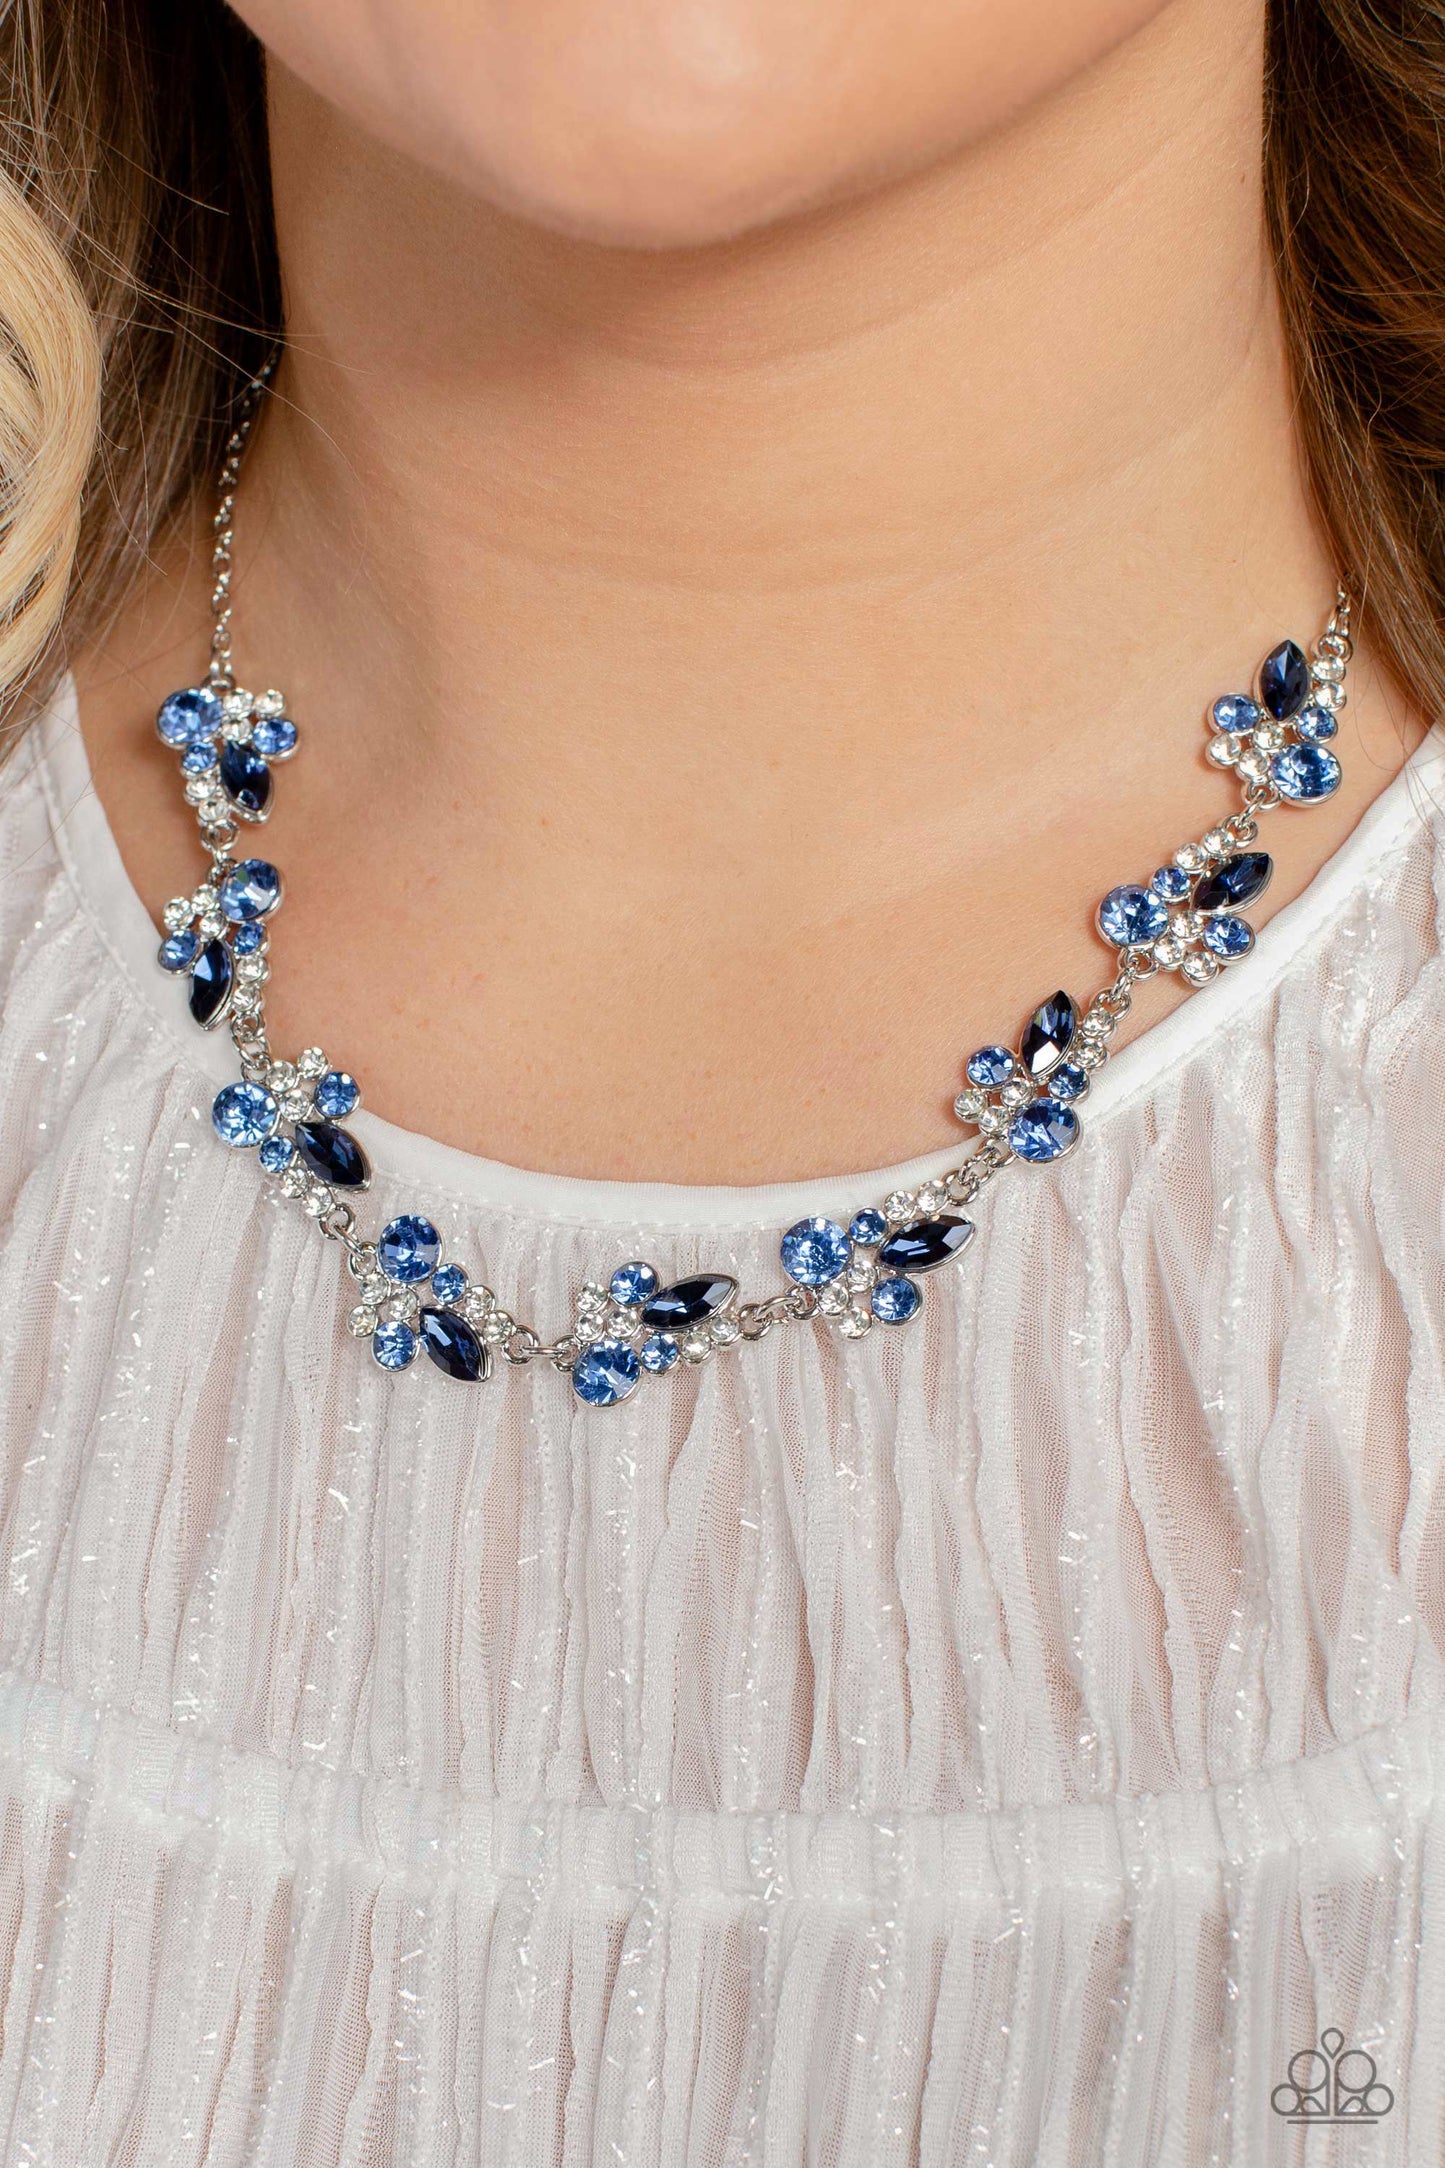 Swimming in Sparkles - Blue & White Rhinestone Clusters Paparazzi Necklace & matching earrings